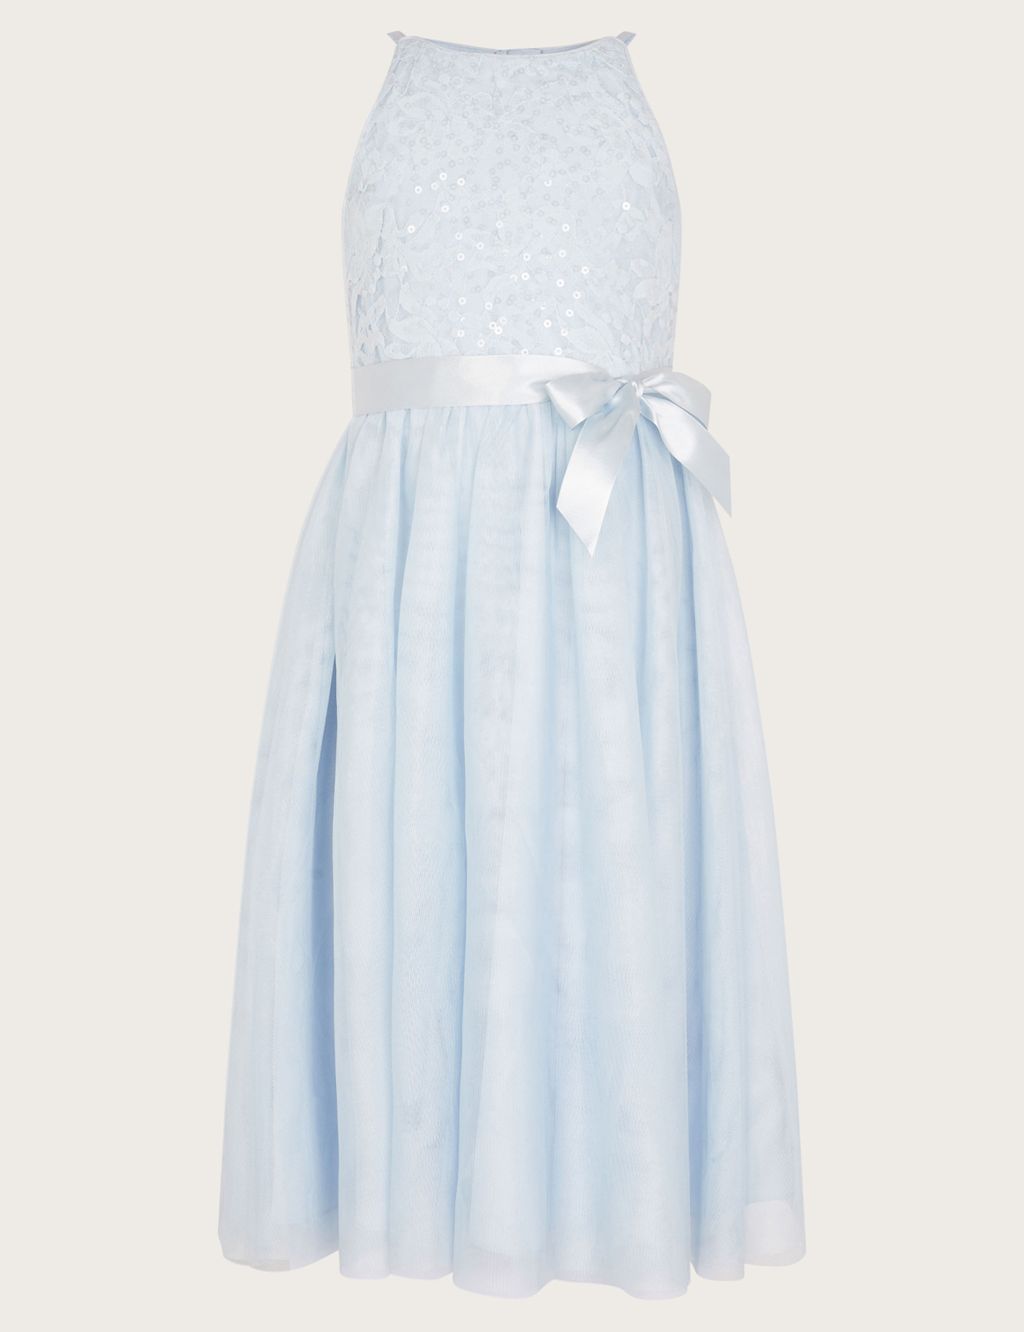 Sequin Tulle Occasion Dress (3-15 Yrs) image 1